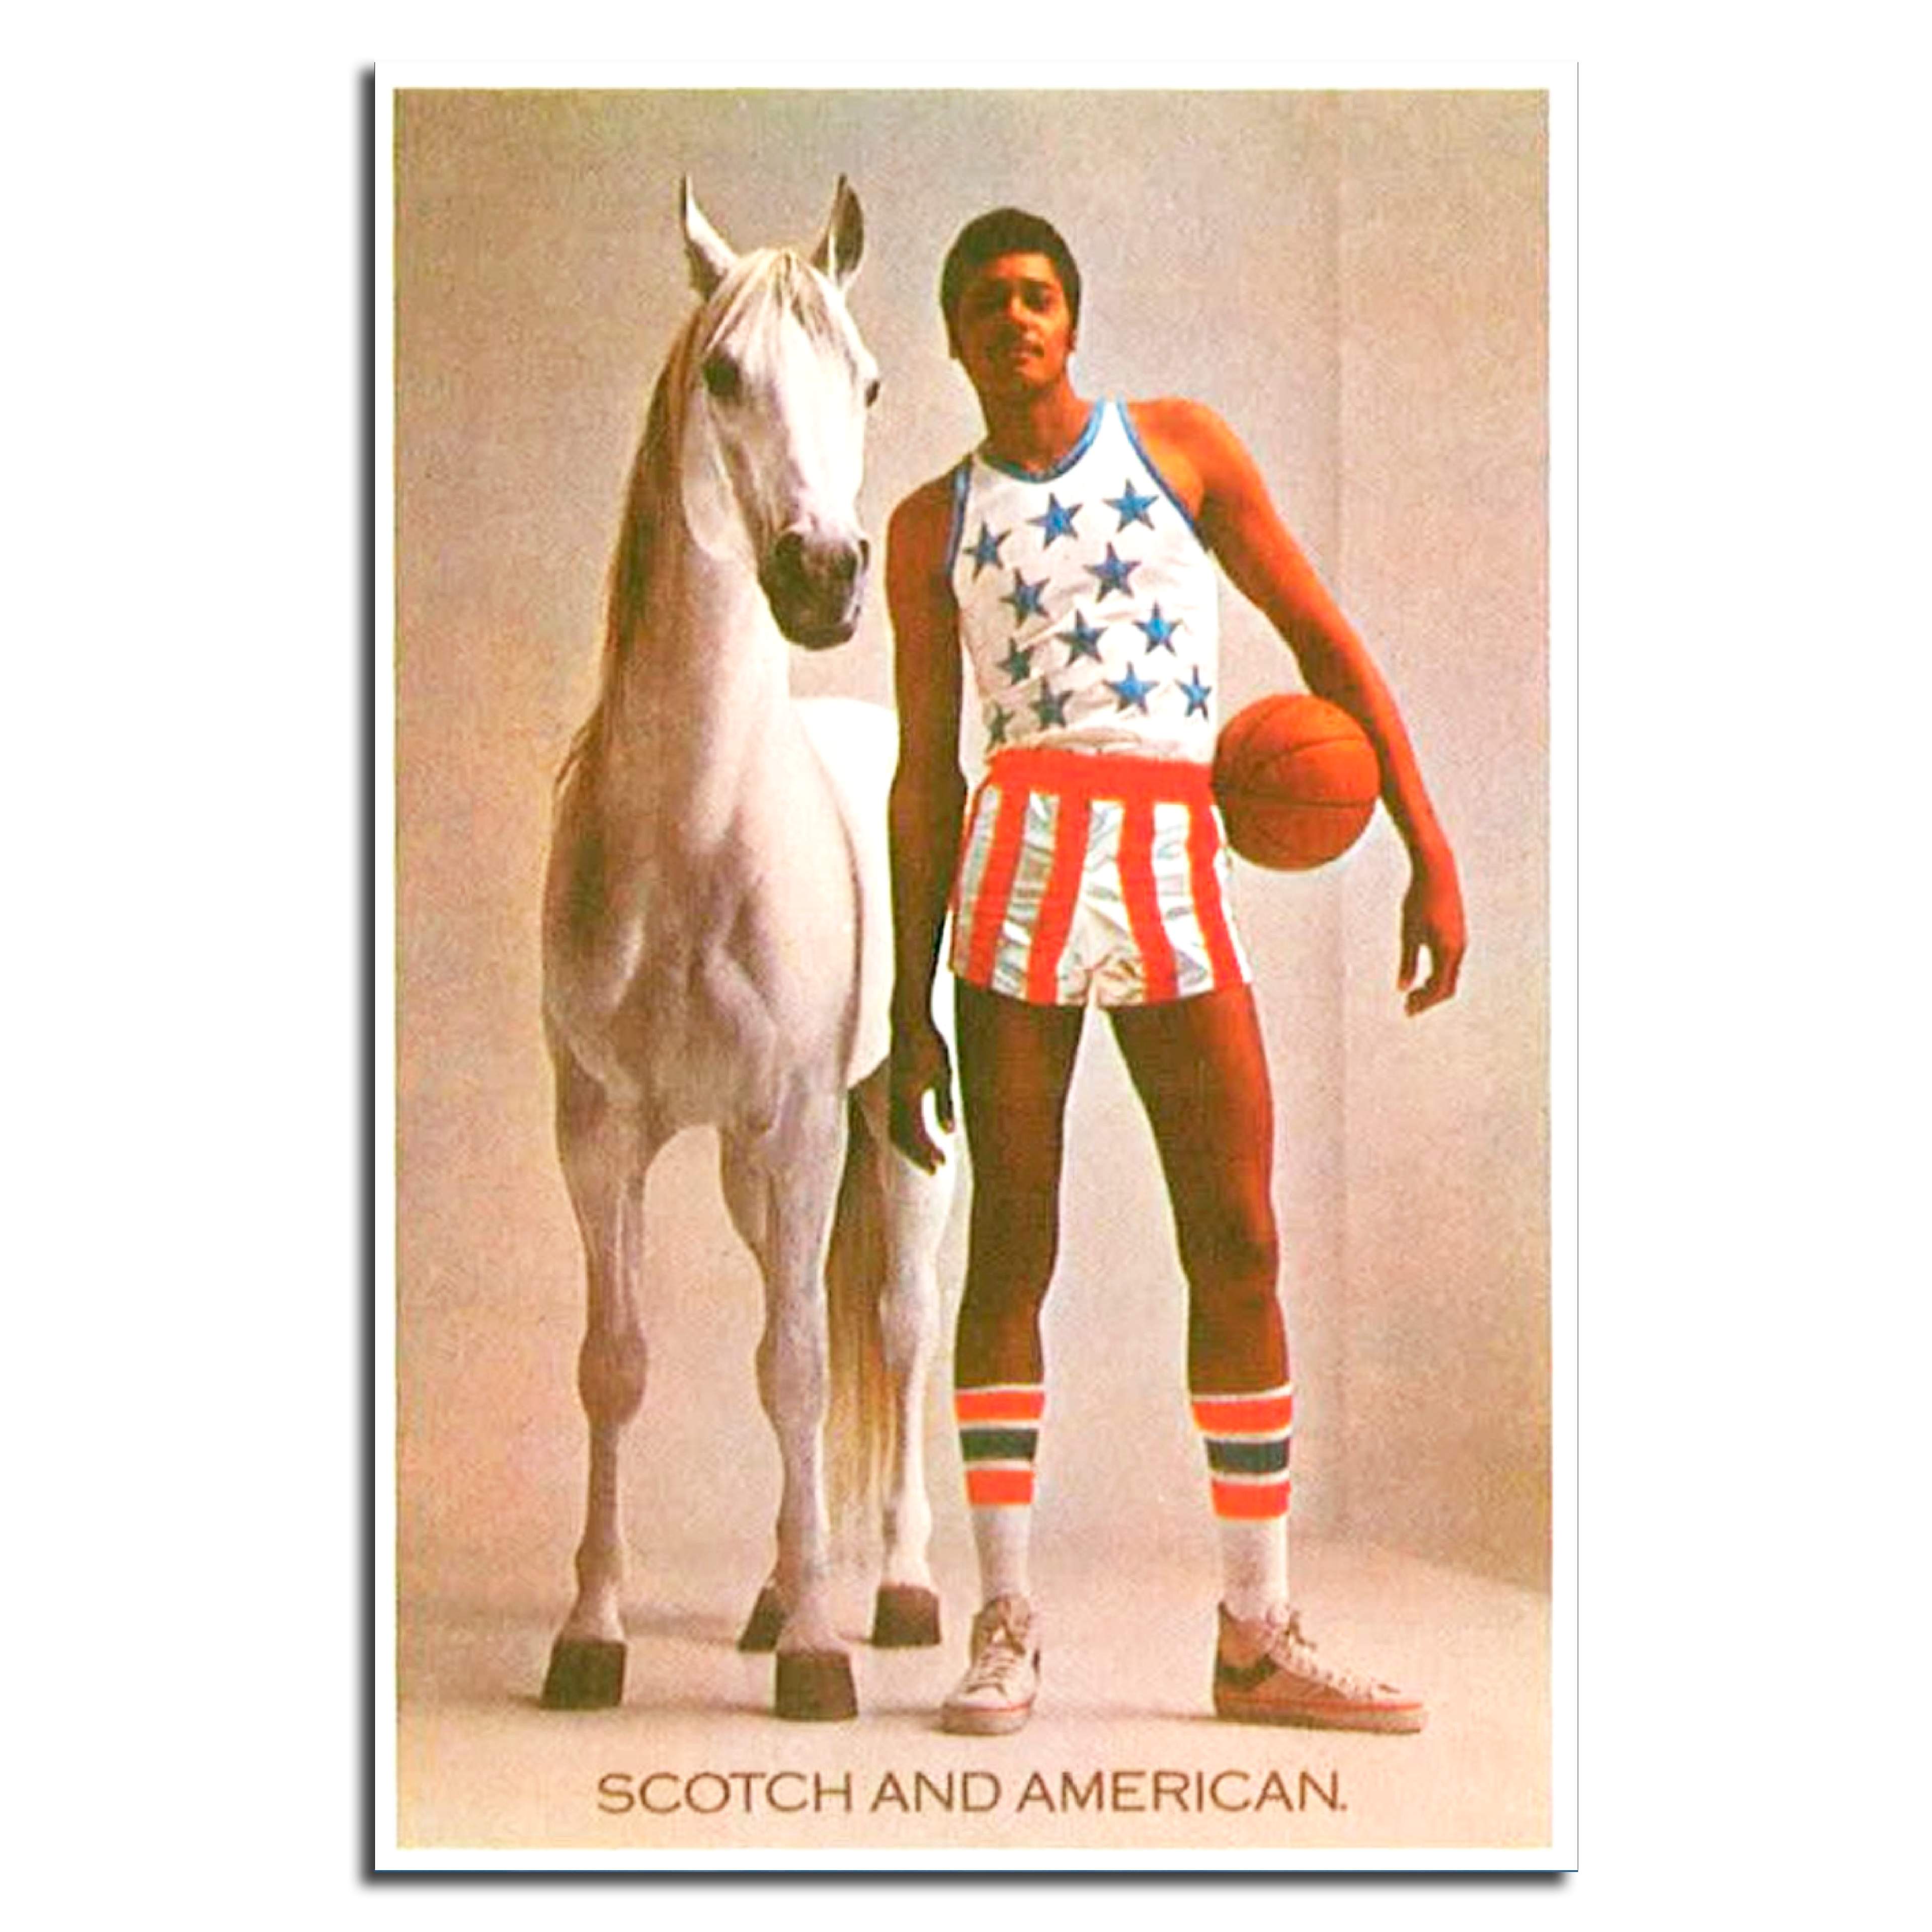 Colour photograph of a white horse with a tall American basketball player. Award-winning White Horse Whisky press ad.